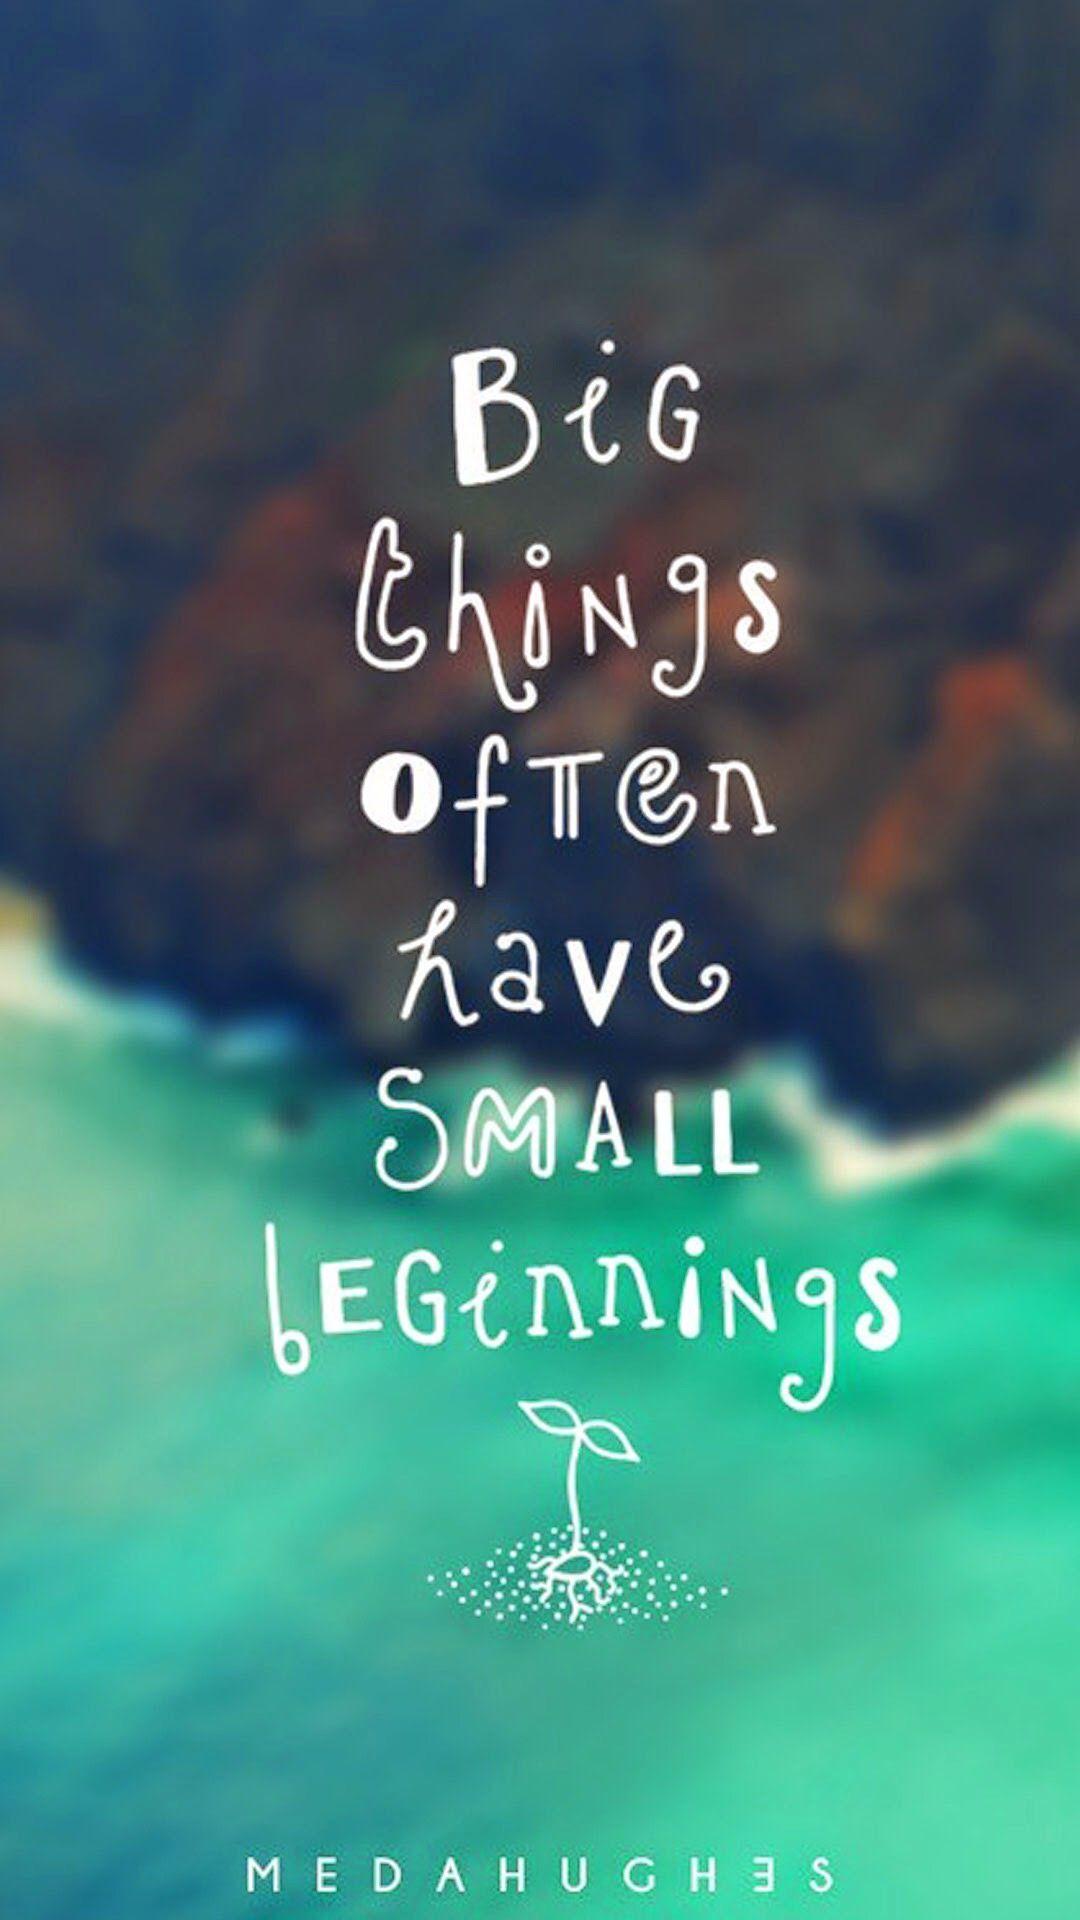 Tap image for more quote wallpaper! Small Beginning